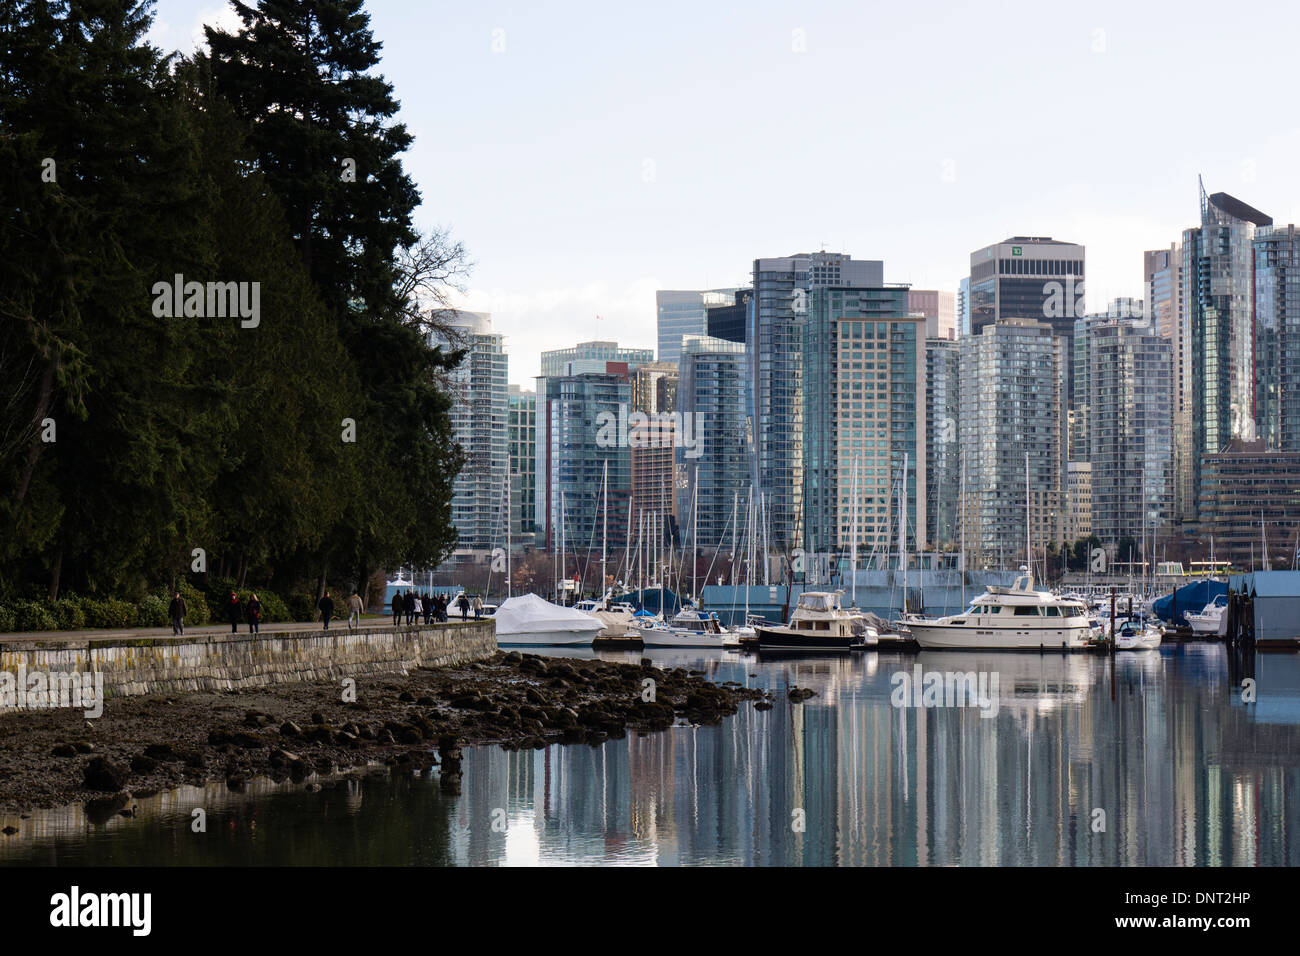 People walking along seawall. Stanley Park & Coal Harbour, Vancouver, British Columbia, Canada. Stock Photo